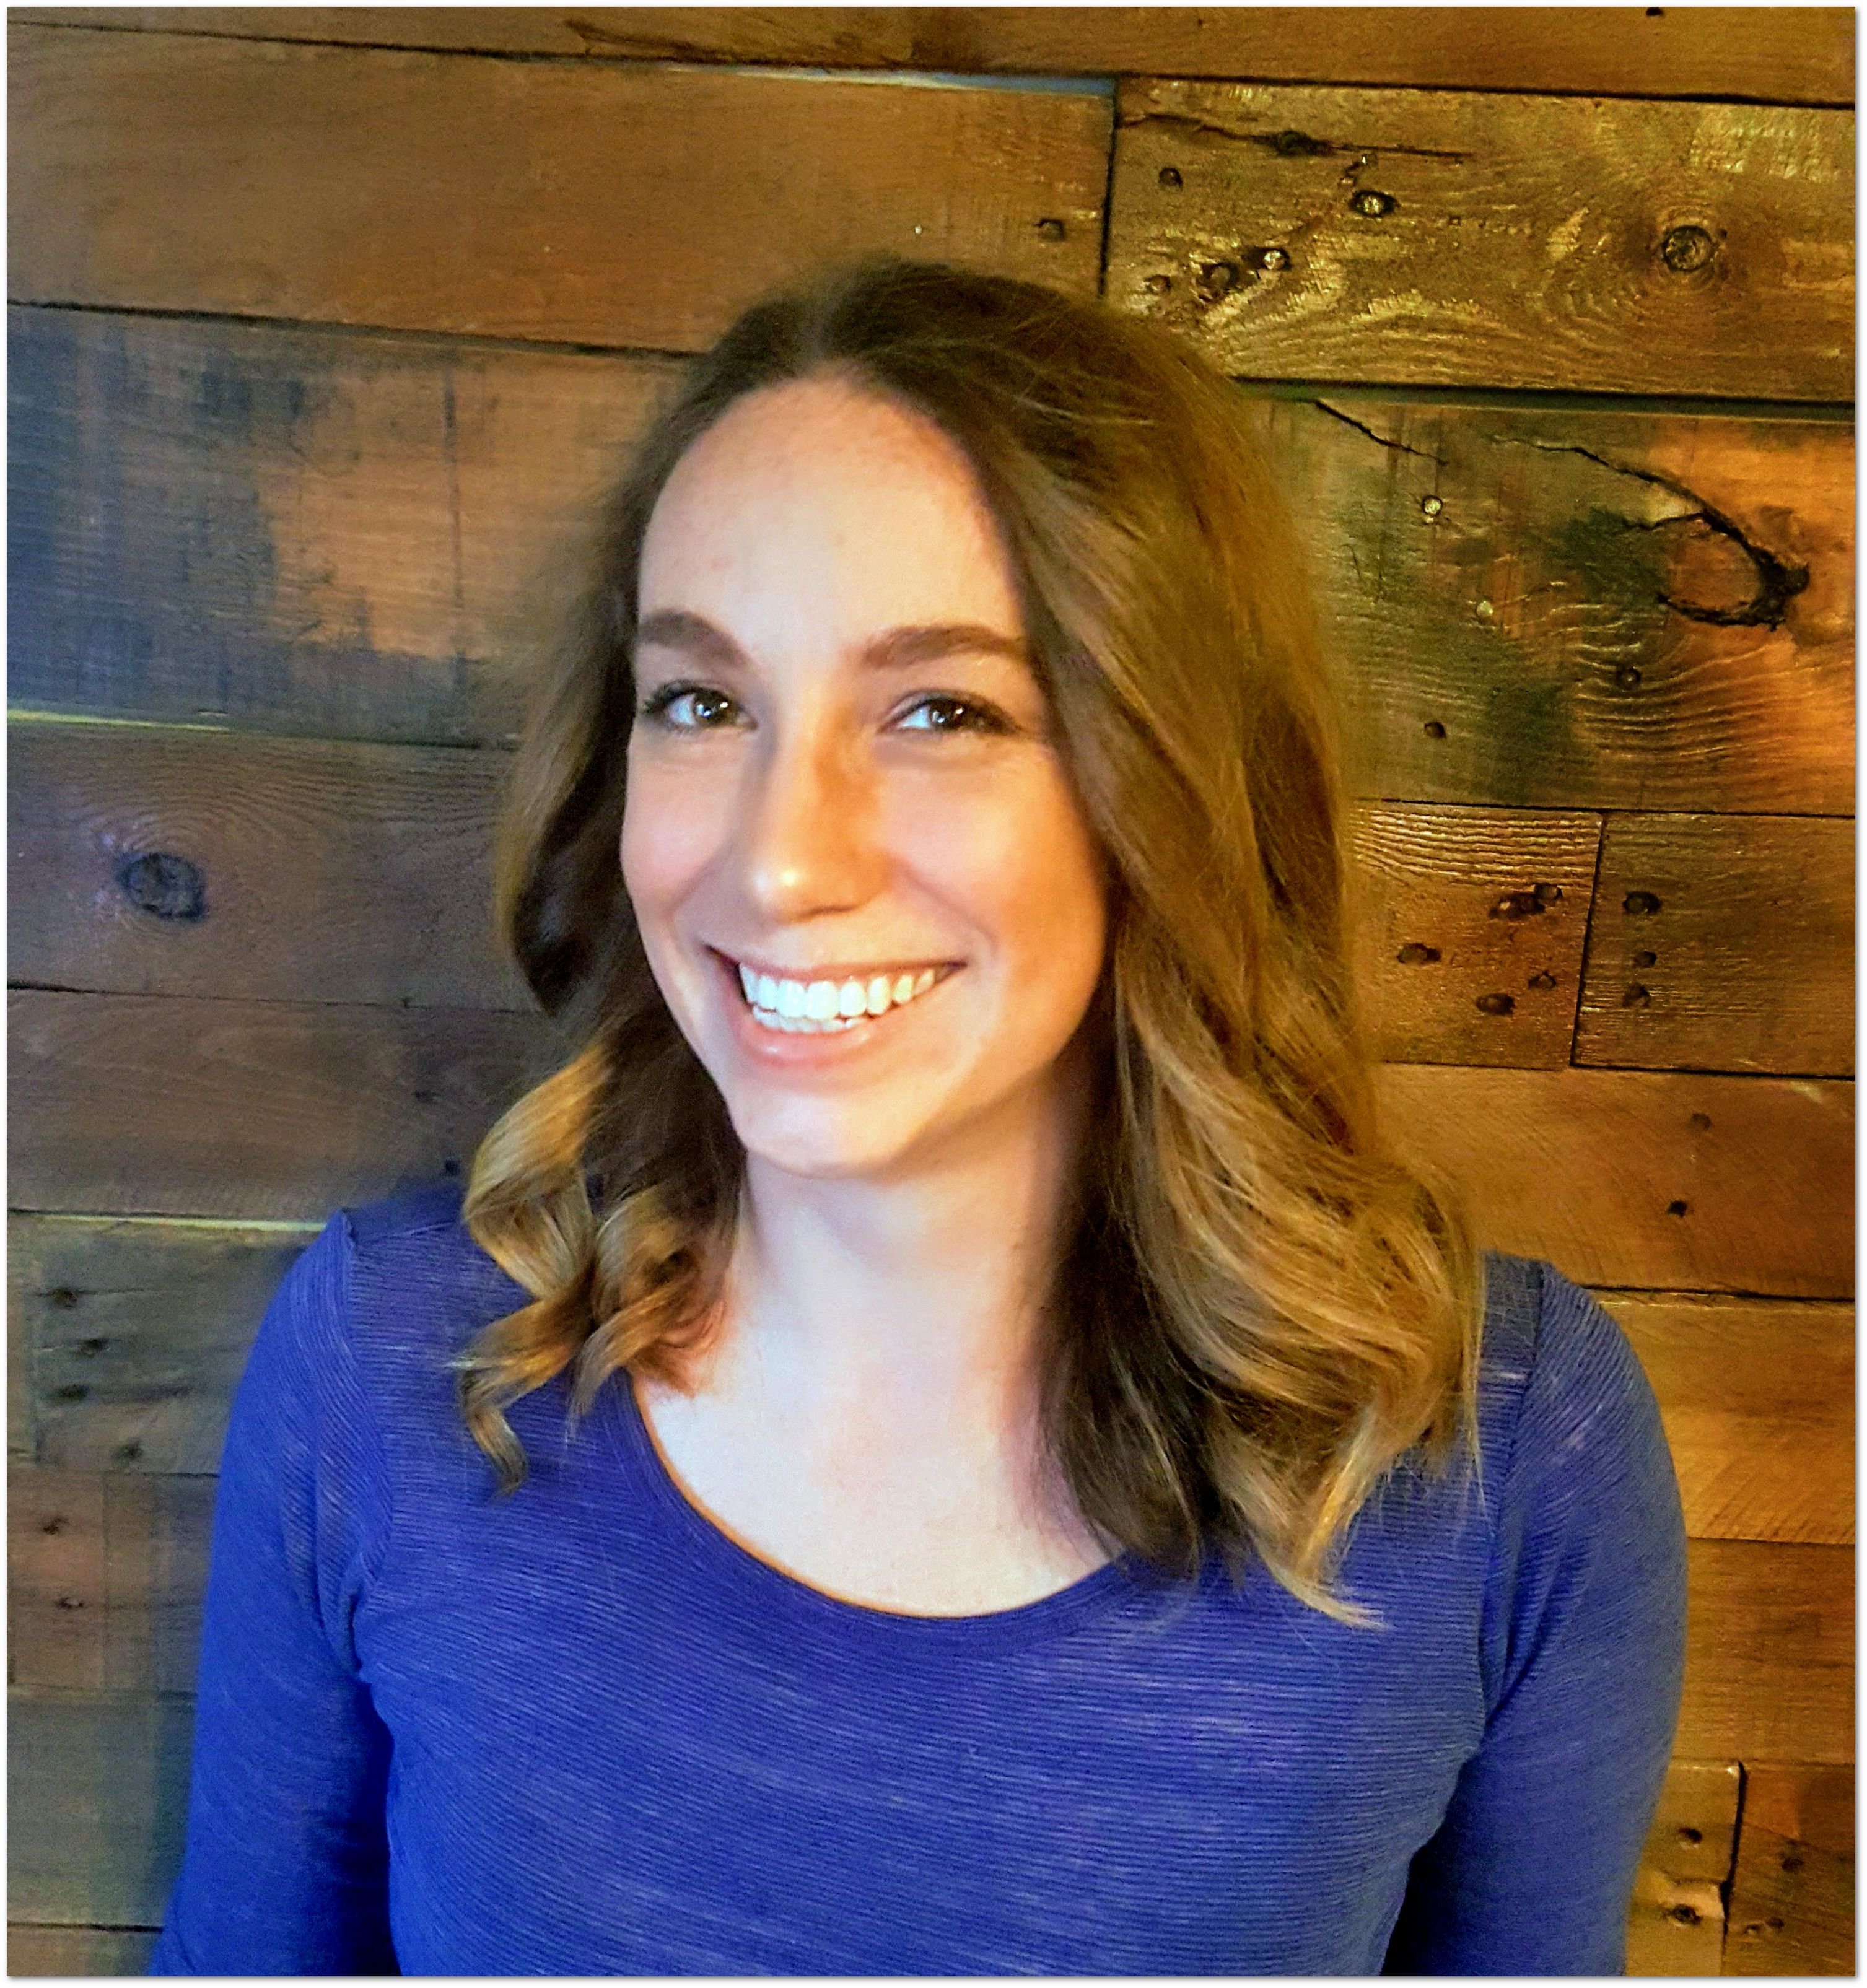 Abbe LaBella smiling big for her headshot while wearing a blue shirt. She's standing in front of a wood plank wall.